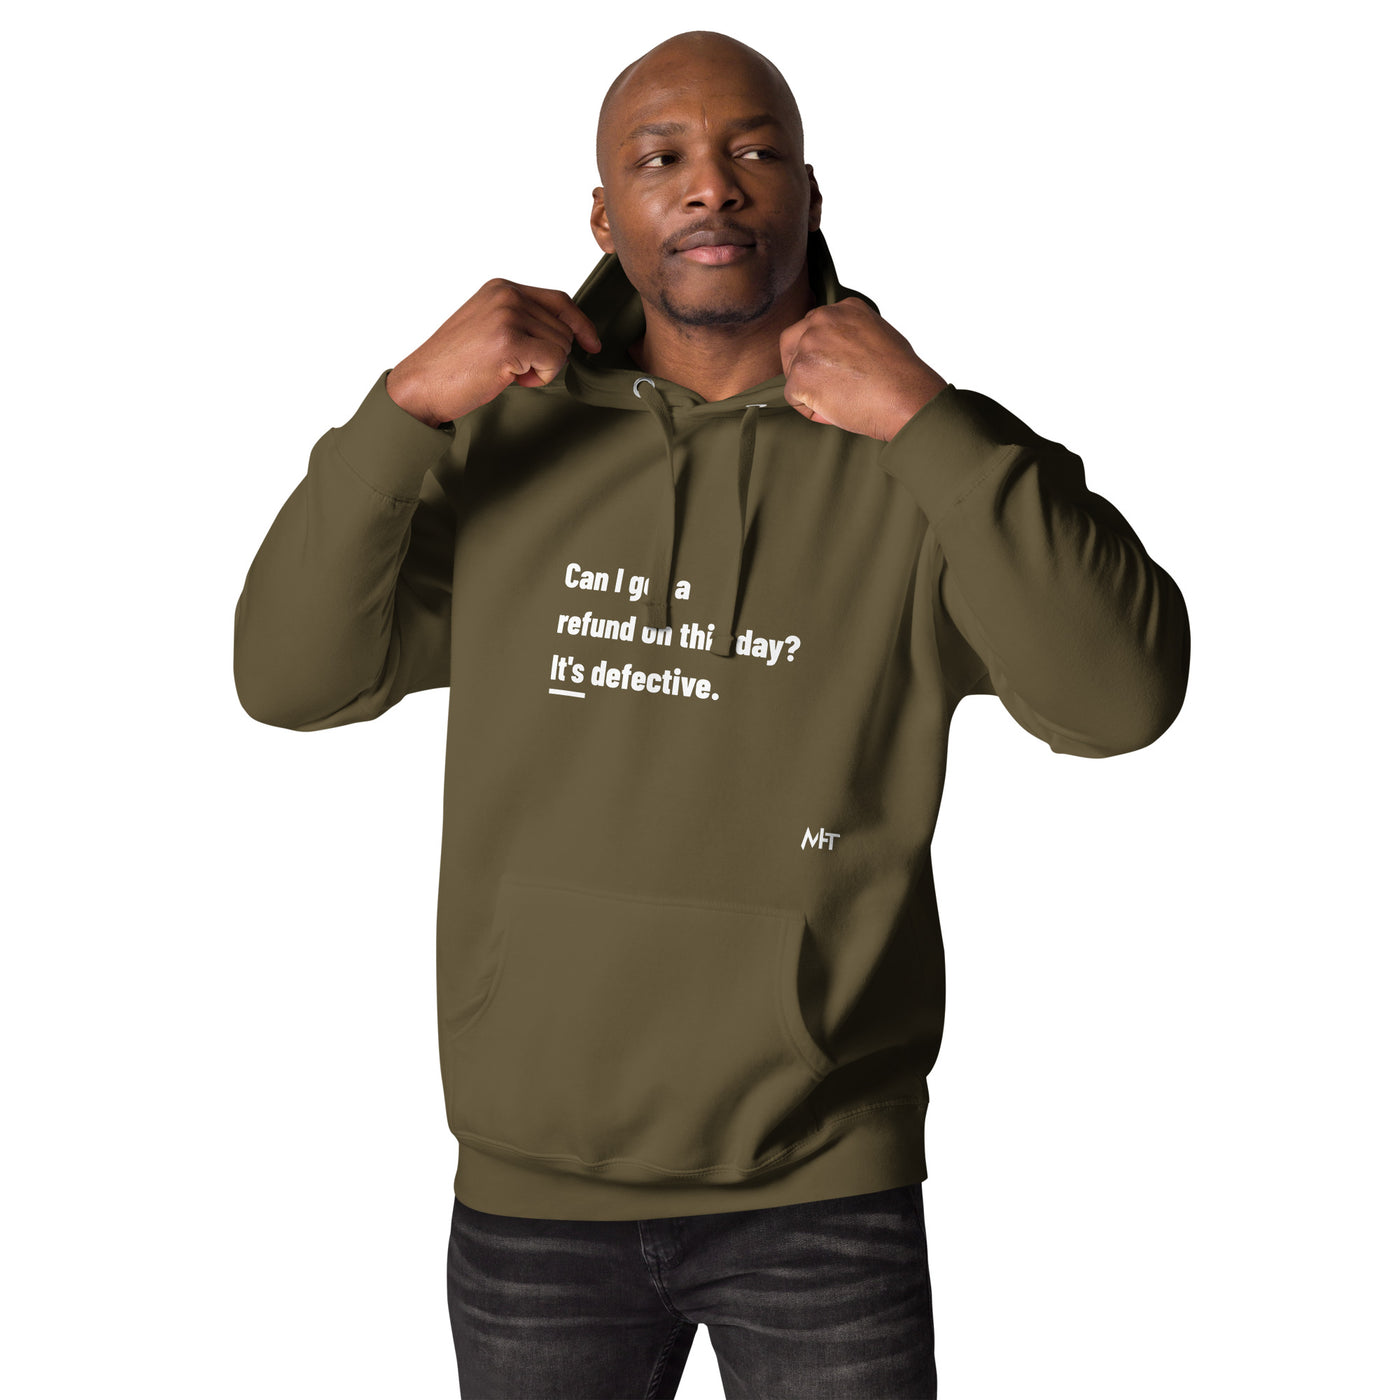 Can I Get a Refund on this Day? It's Defective - Unisex Hoodie